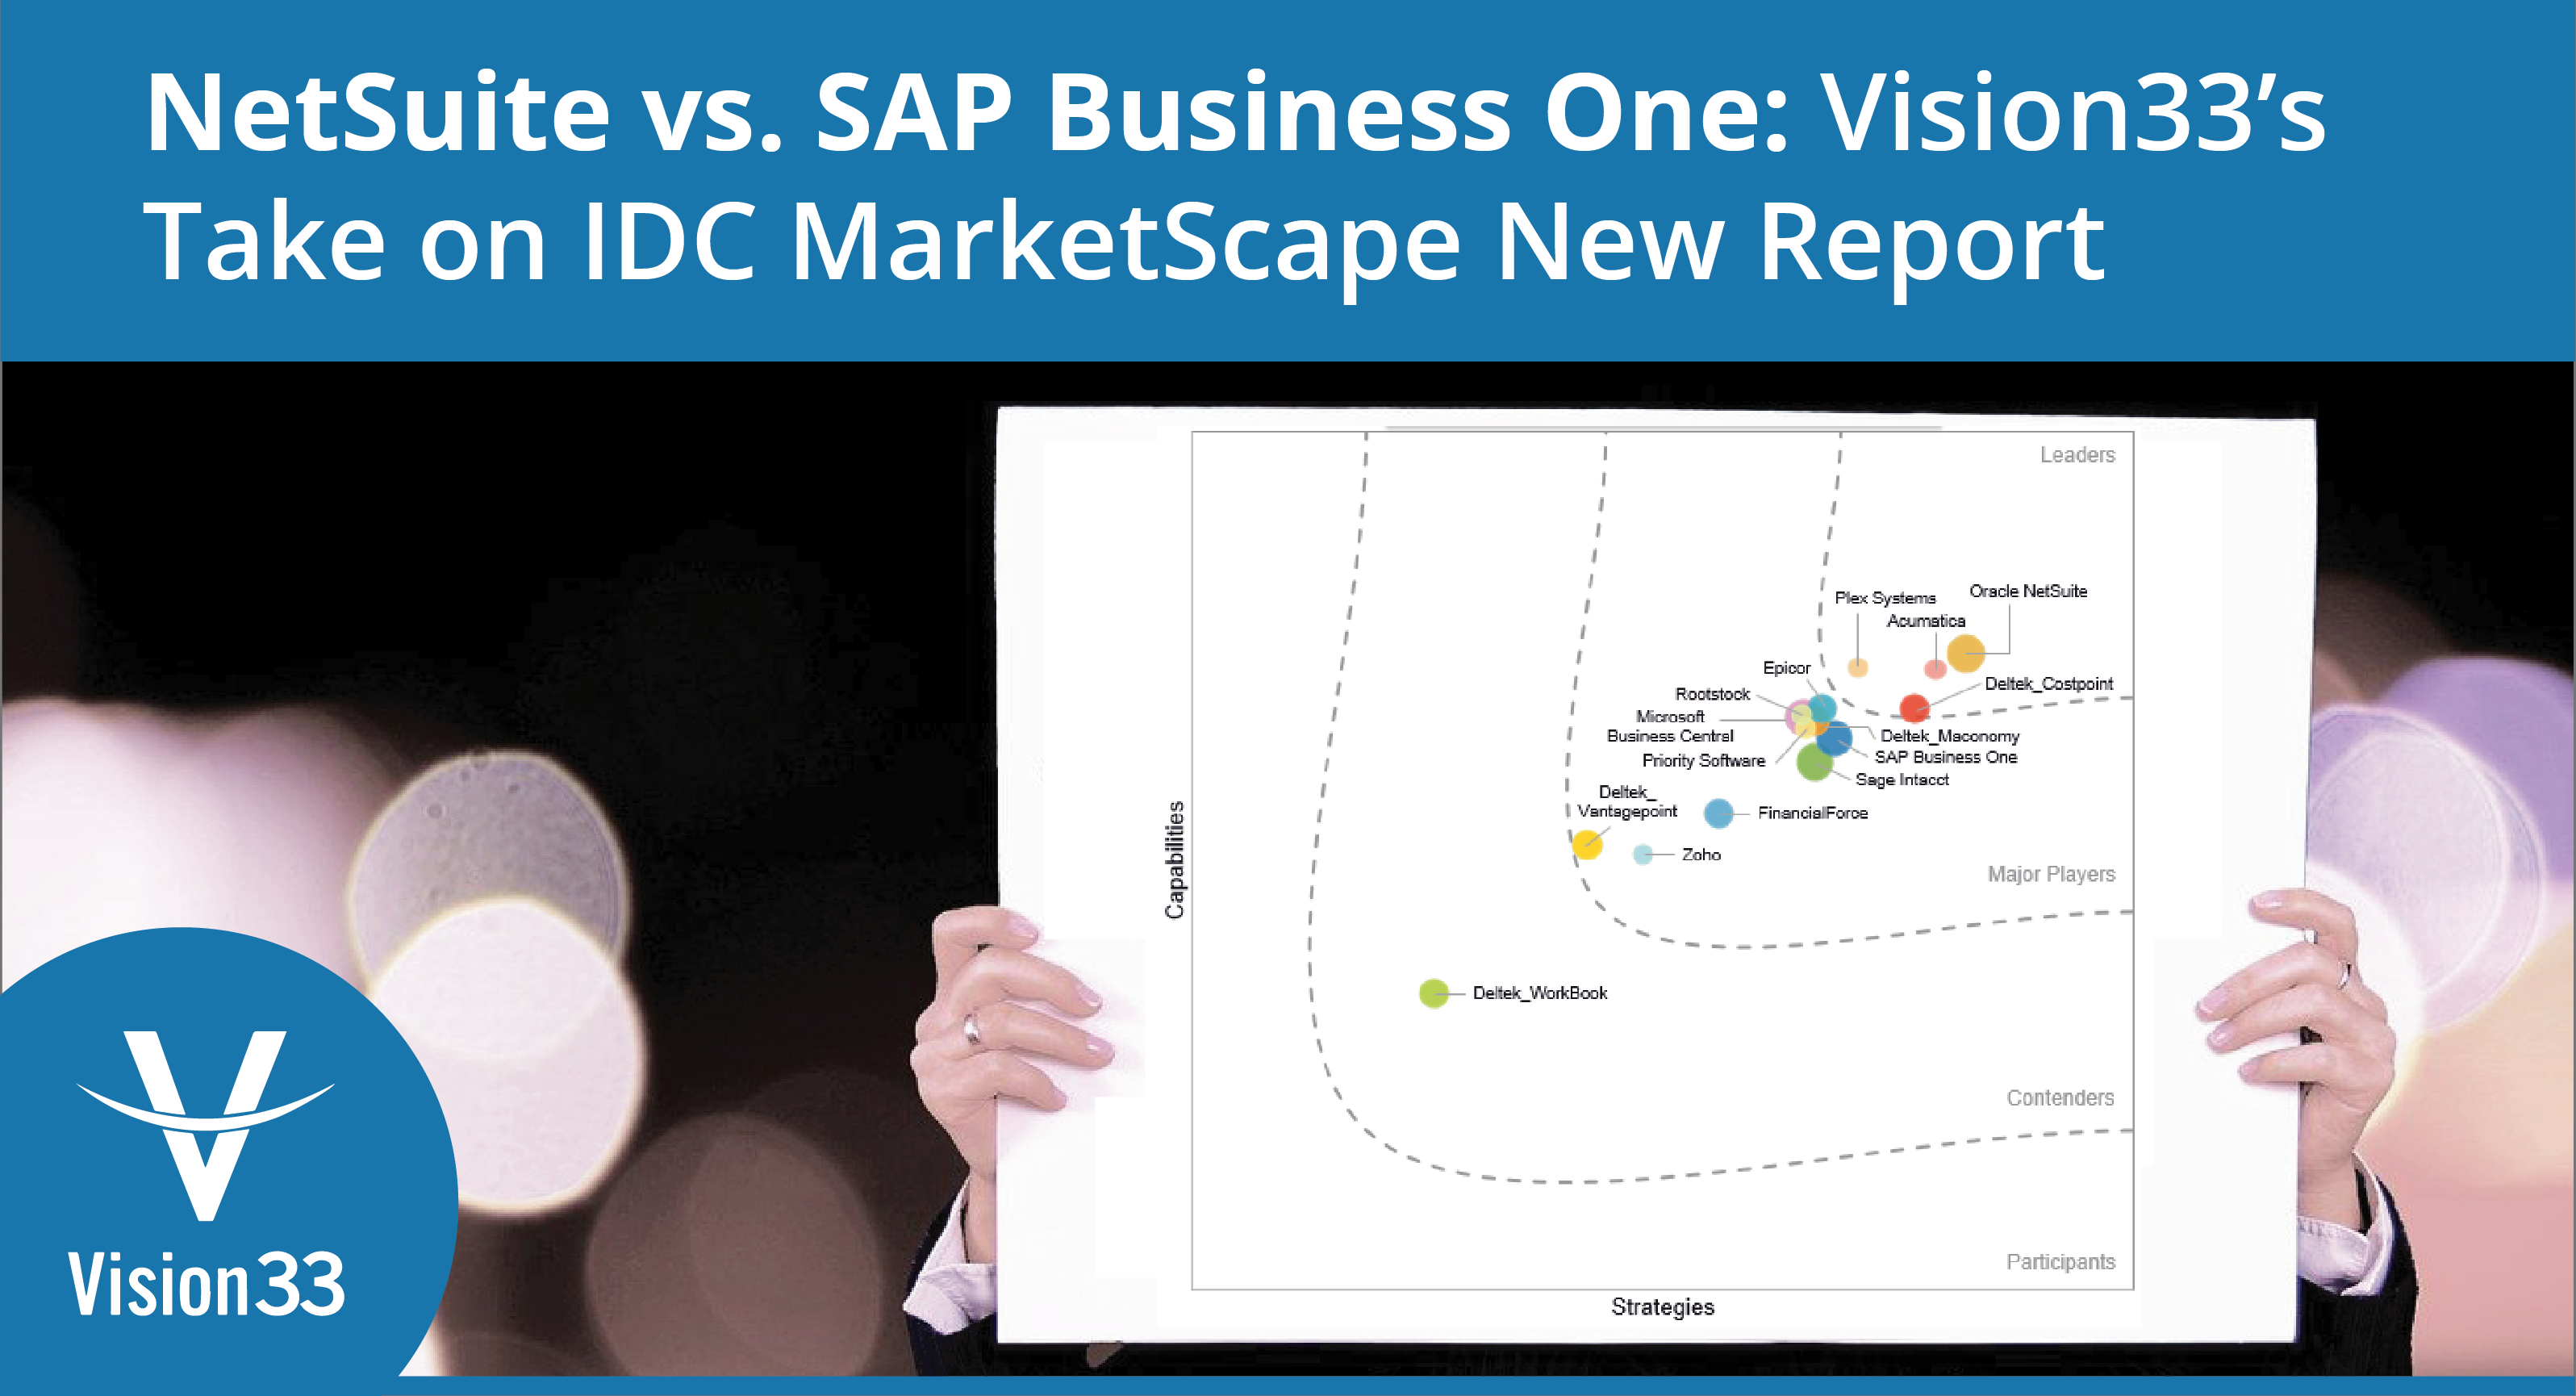 NetSuite vs. SAP Business One